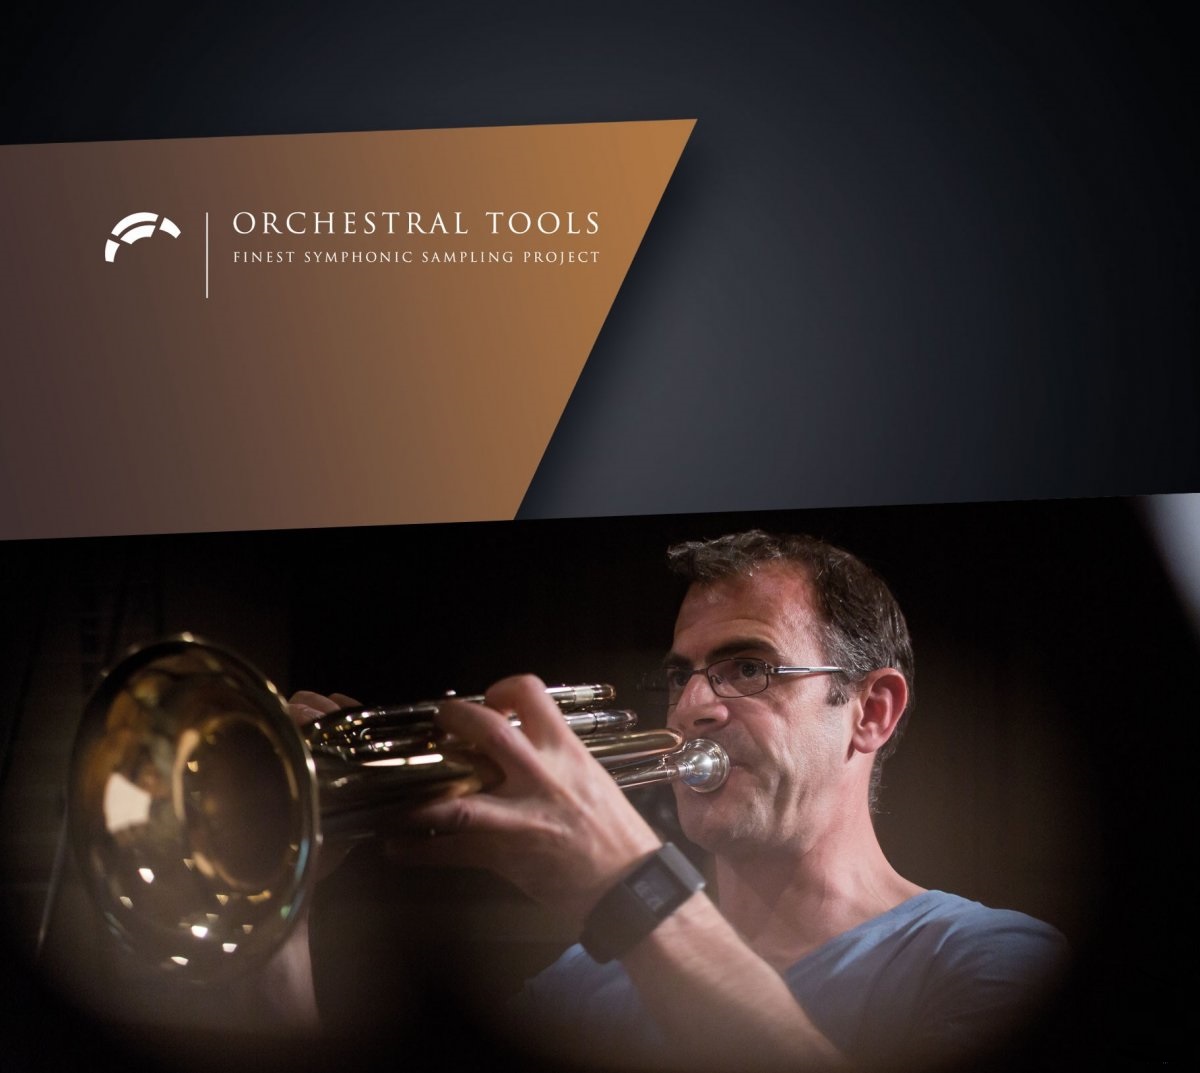 Orchestral tools berlin brass torrent